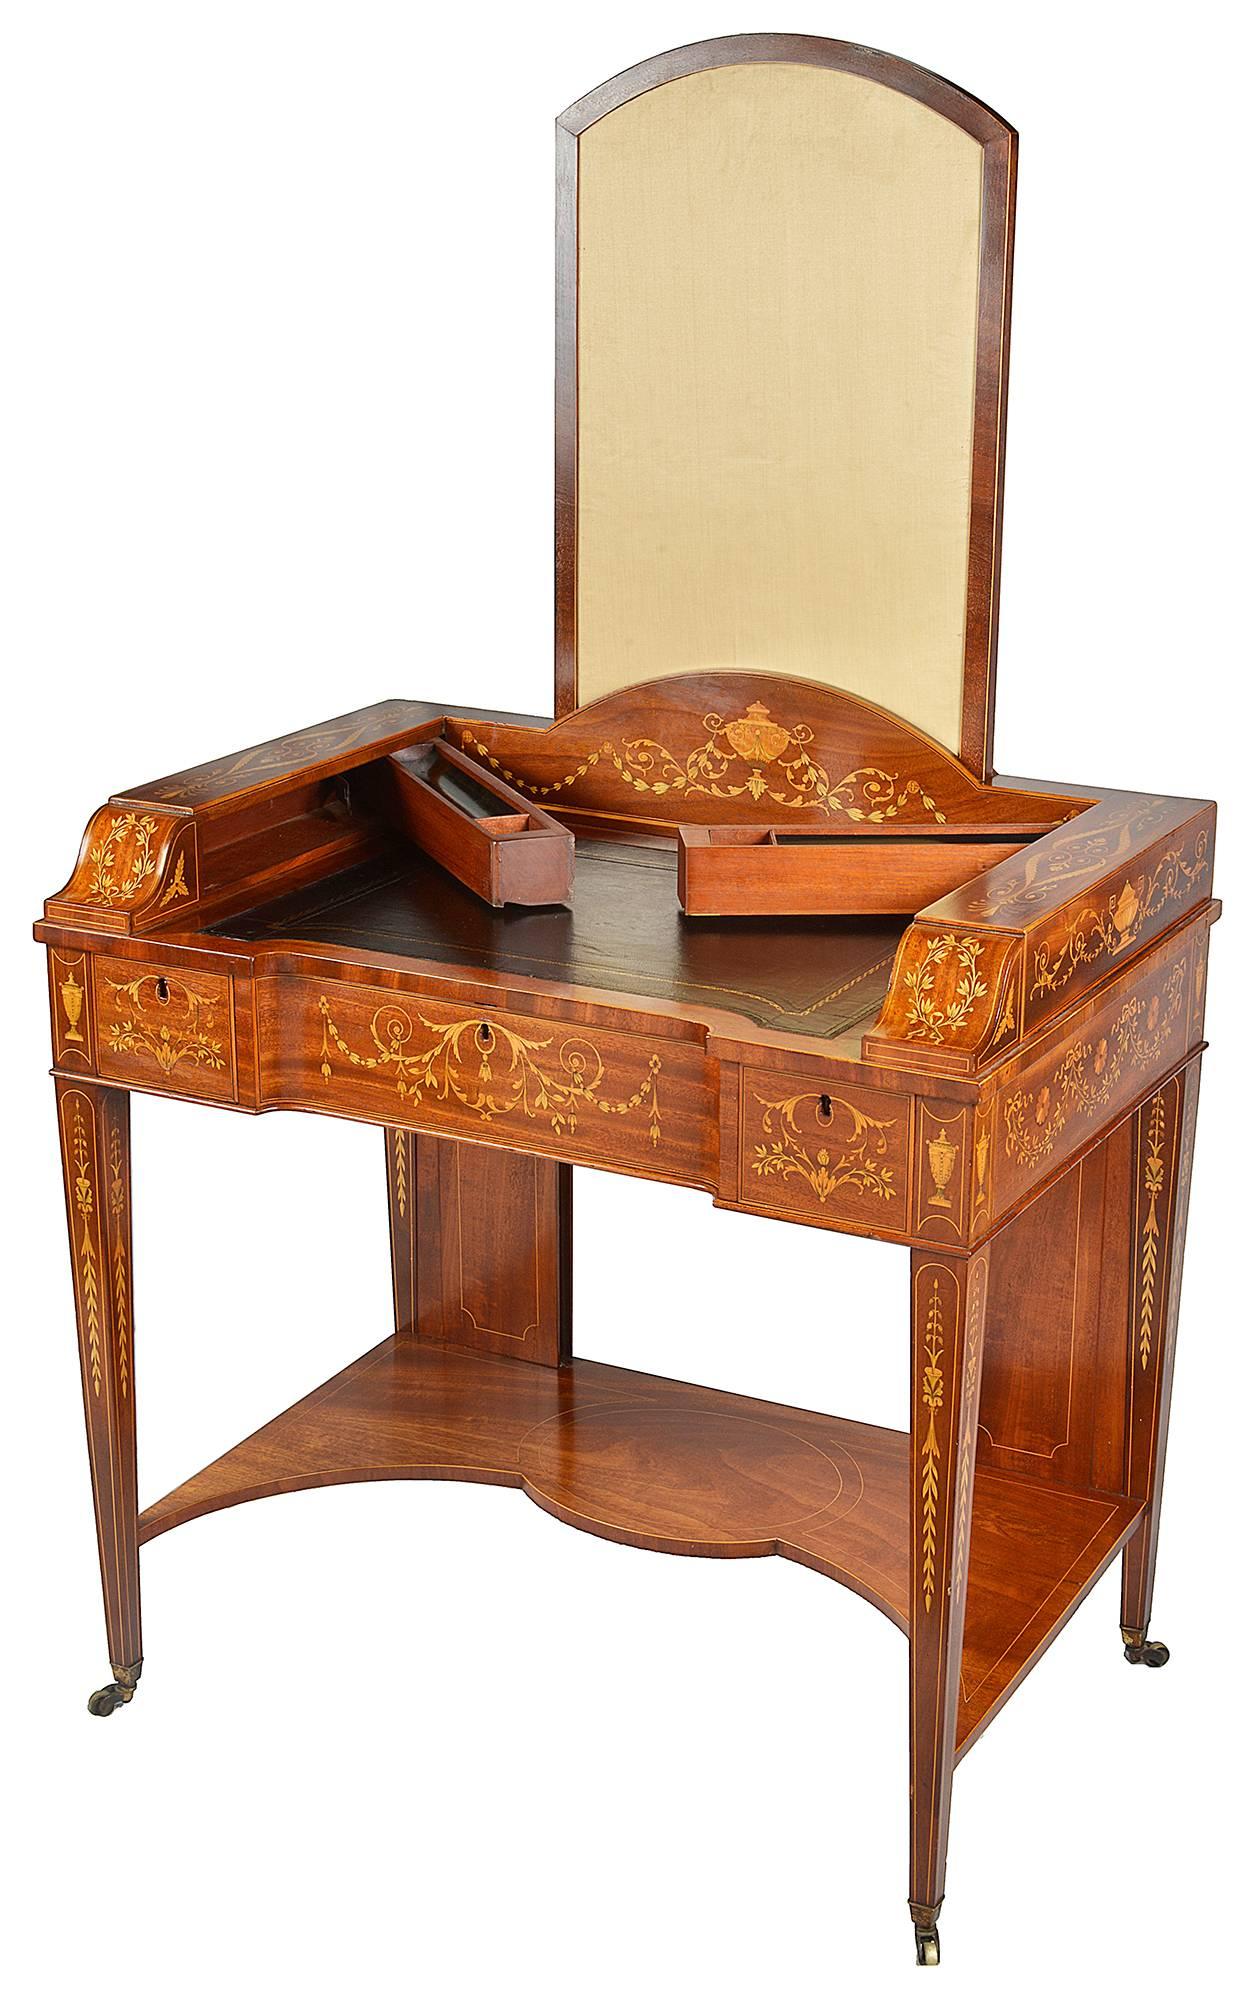 A very good quality 19th Century Edwardian period, Sheraton Revival inlaid desk. Having a fire screen that pulls up, secret compartments that pop out from the sides for ink and pens. An inset leather top, three frieze drawers, each with inlaid